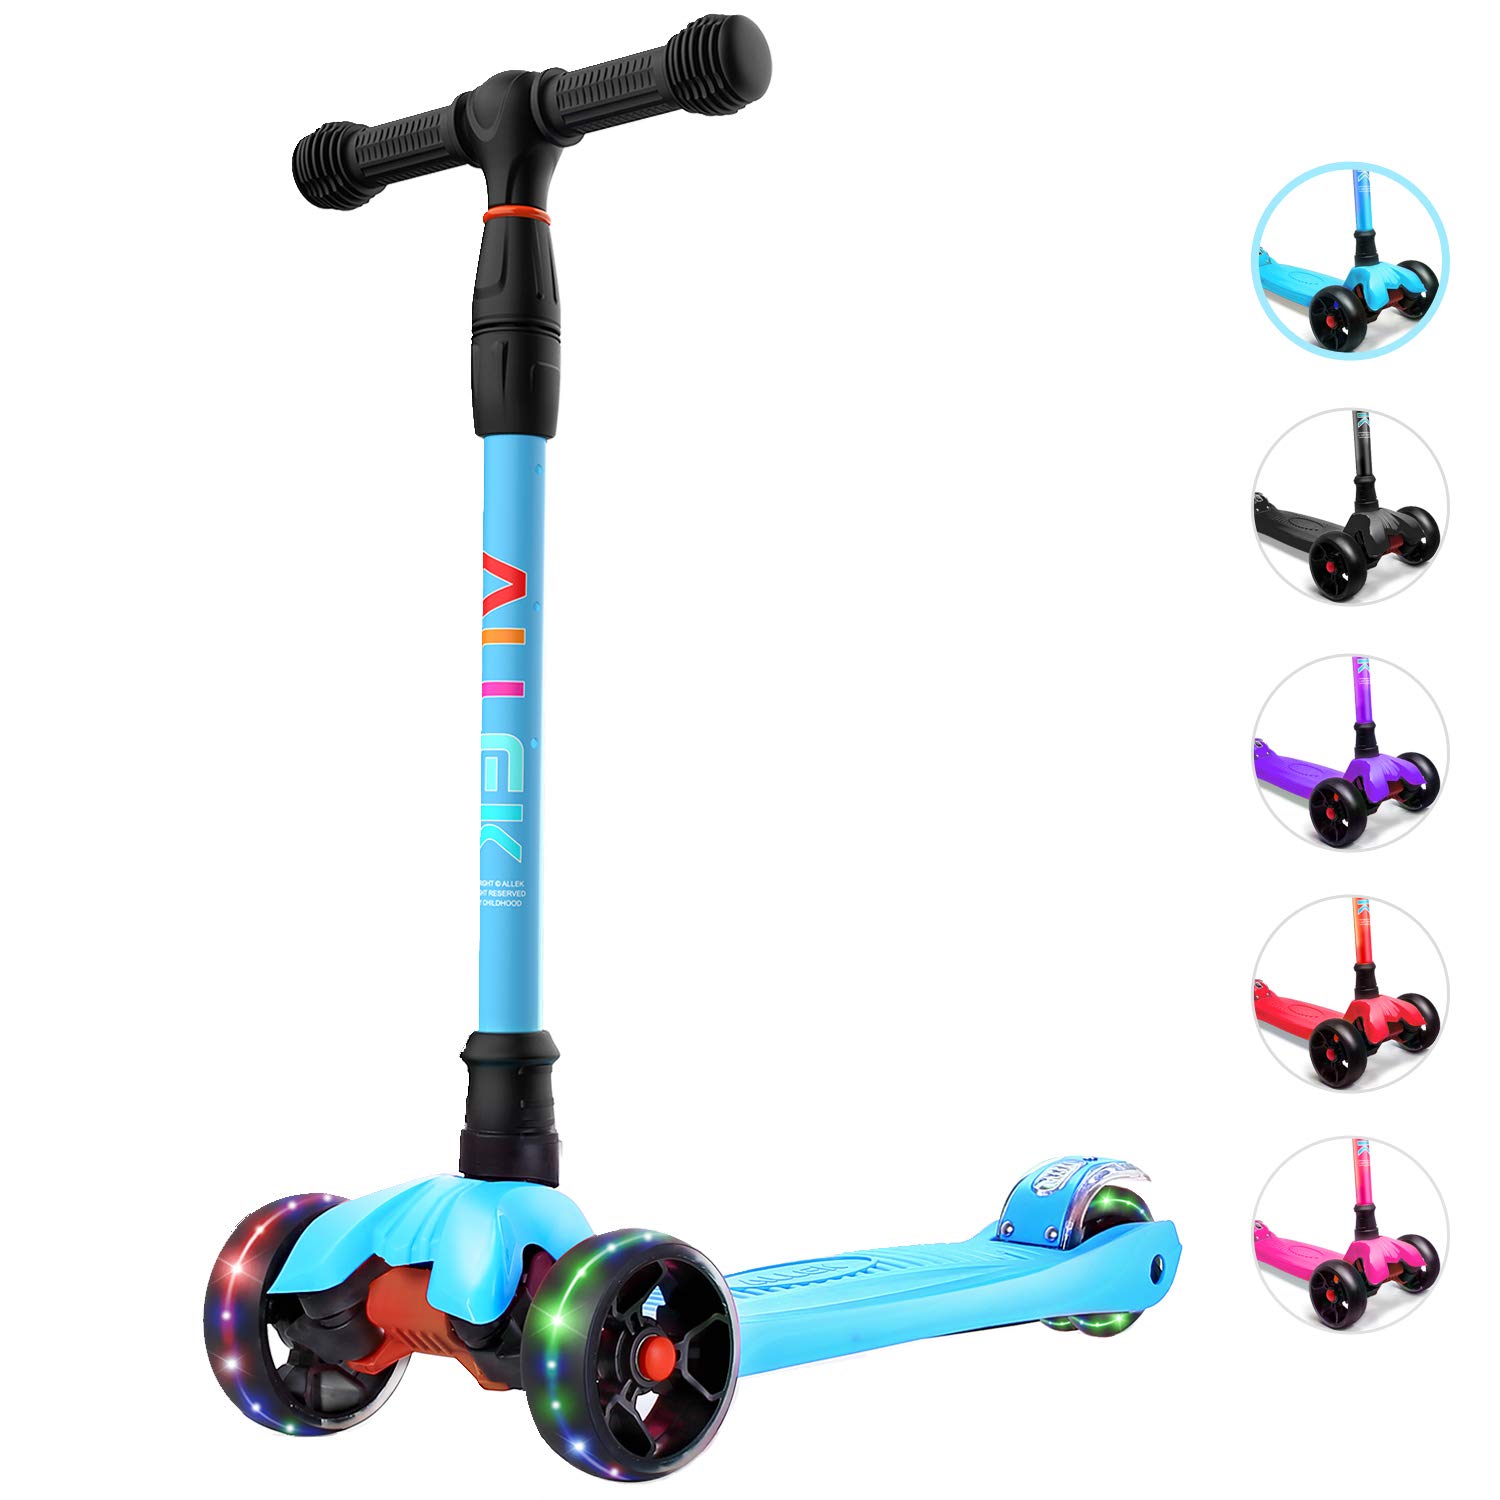 Allek Kick Scooter B02, Lean 'N Glide Scooter with Extra Wide PU Light-Up Wheels and 4 Adjustable Heights for Children from 3-12yrs